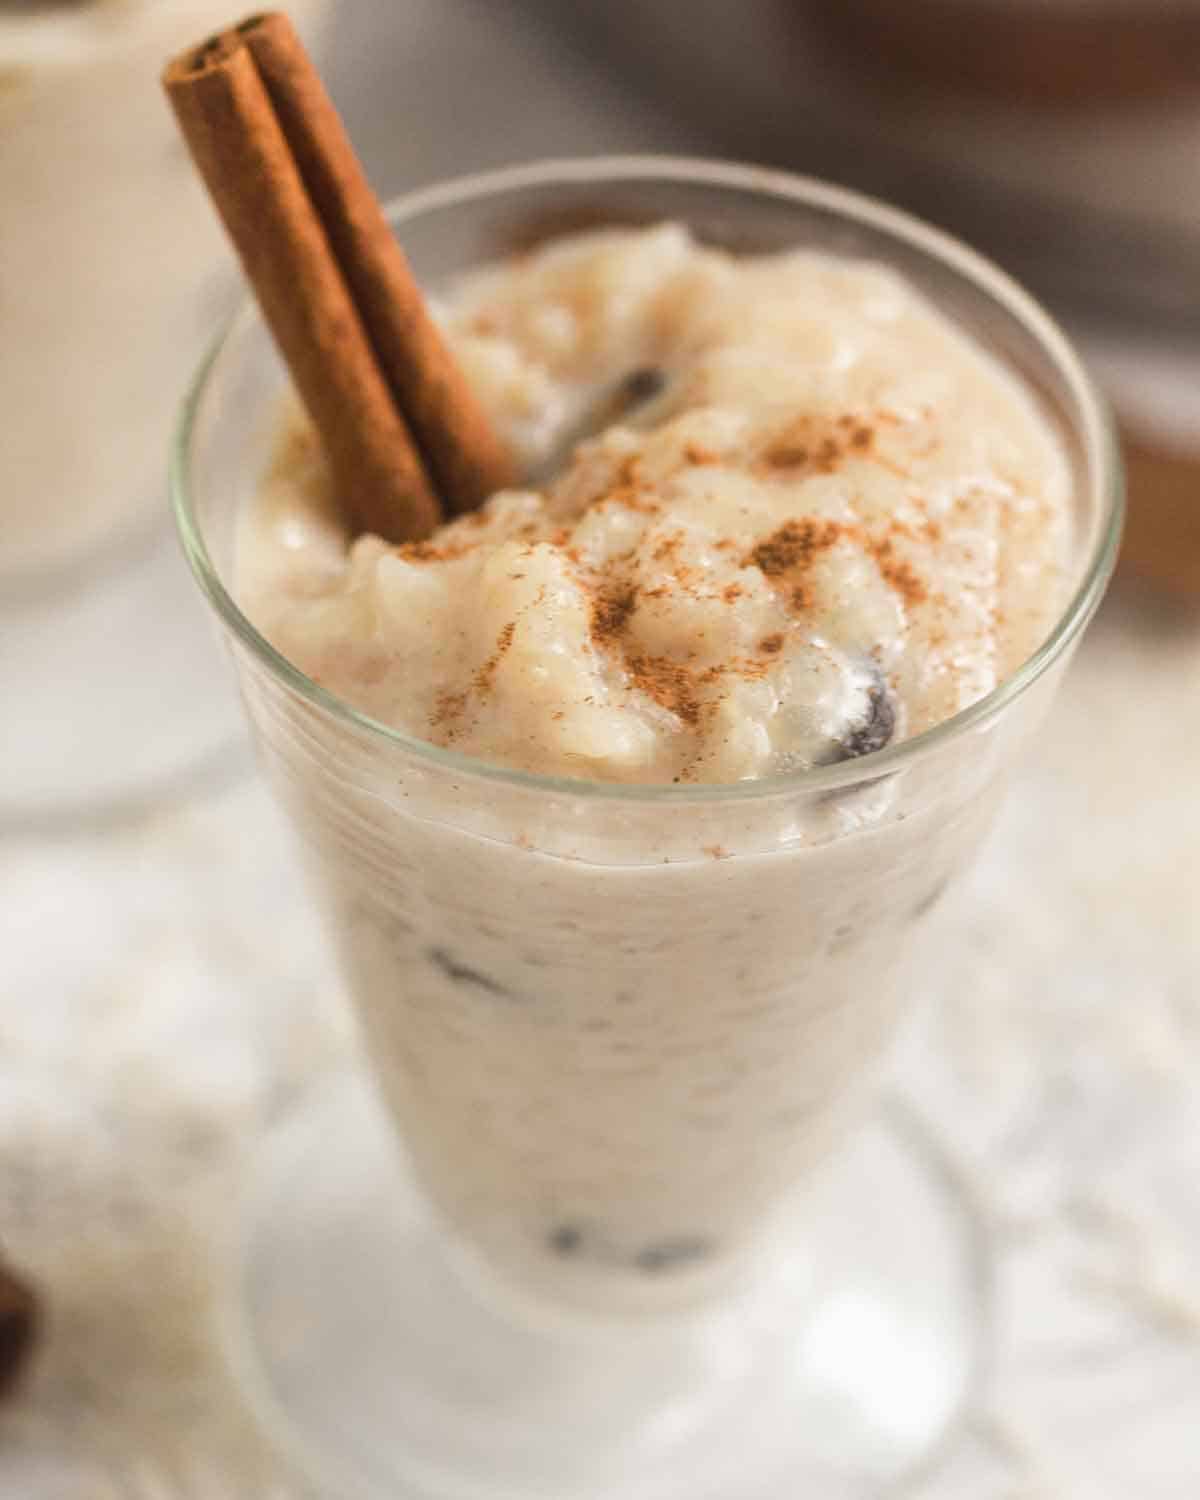 Close up of a glass with rice pudding, a cinnamon stick and ground cinnamon sprinkled on top.